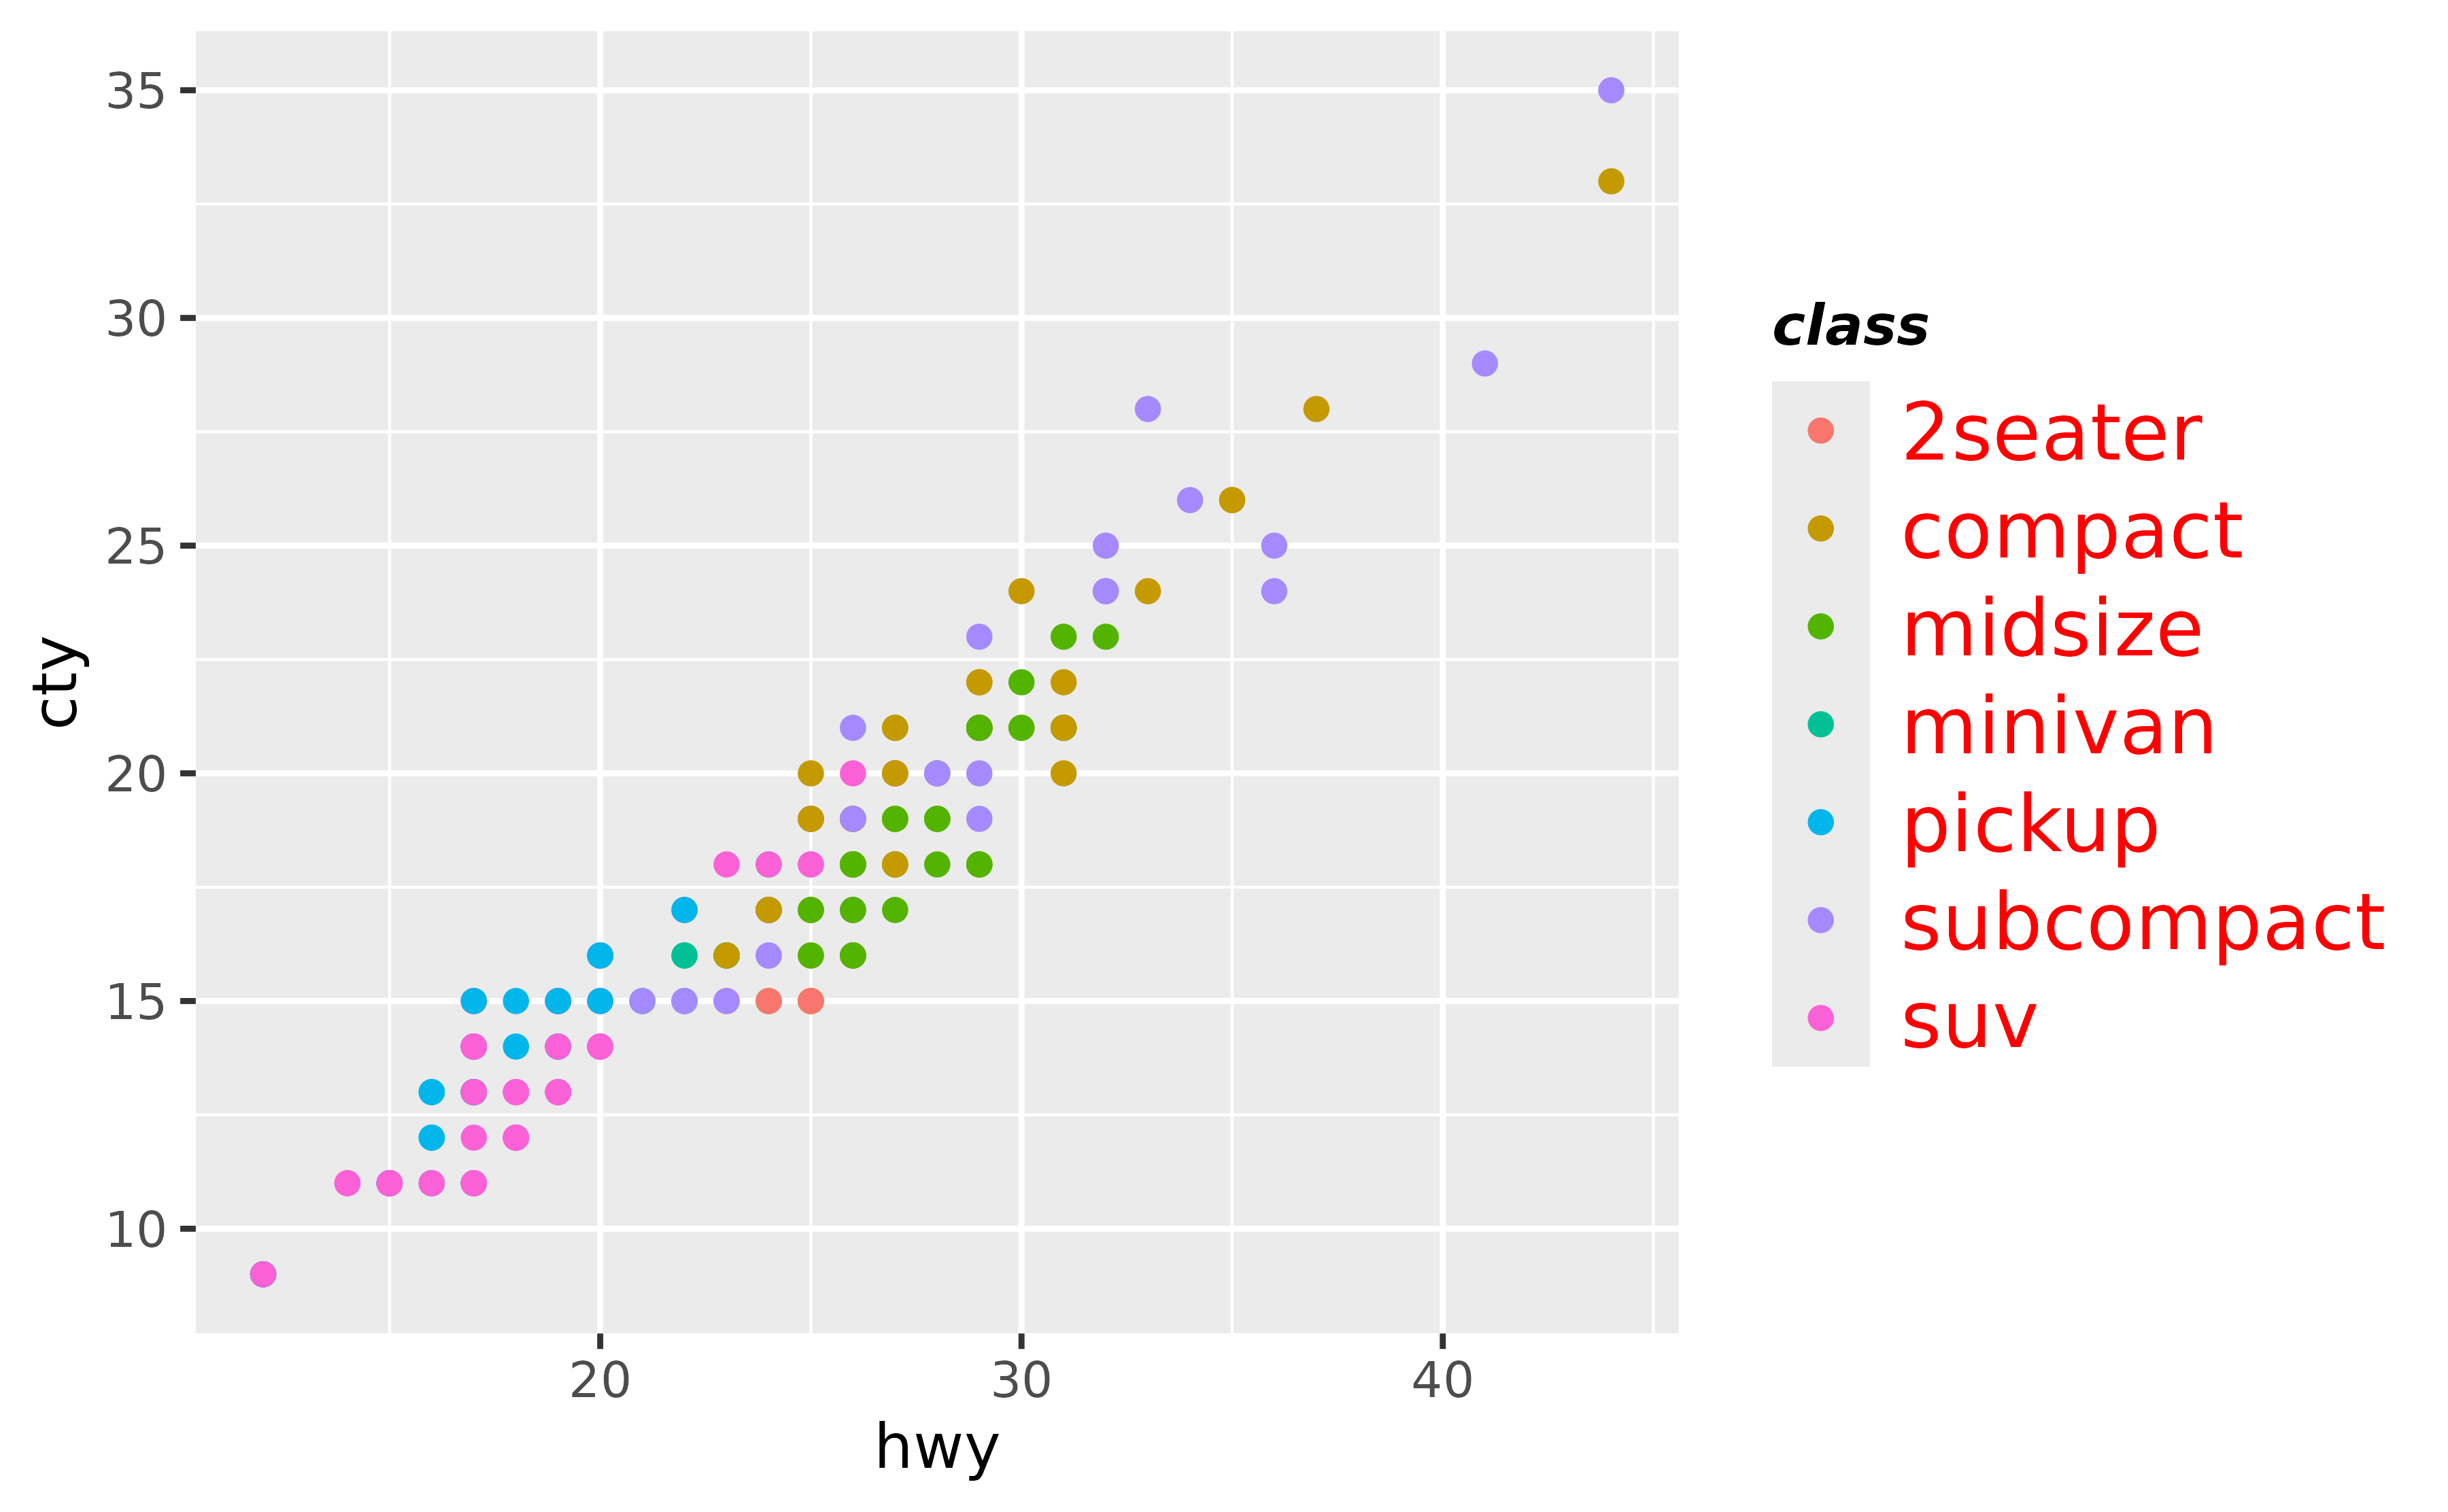 A scatter plot showing the highway miles per gallon on the x-axis and city miles per gallon on the y-axis. The points are coloured by seven types of cars, which is displayed in the legend on the right of the plot. The labels in the legends have a large, red font. The title has a smaller, black font and is in bold and italic.